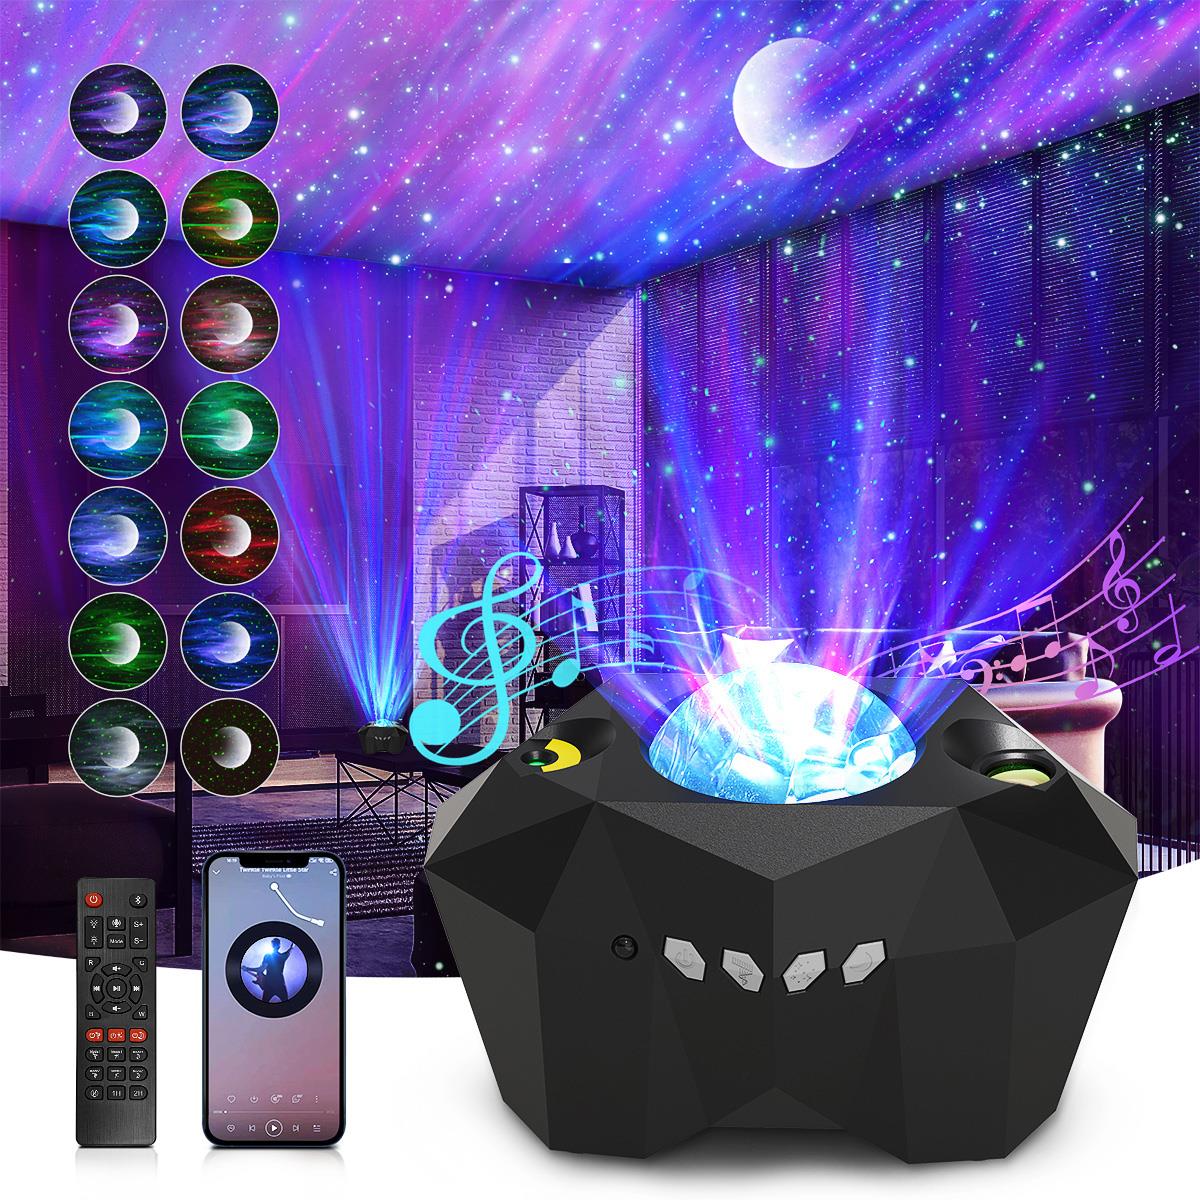 Star Projector, 3 in 1 LED Galaxy Moon Projector with Remote Control, 55 Lighting Modes